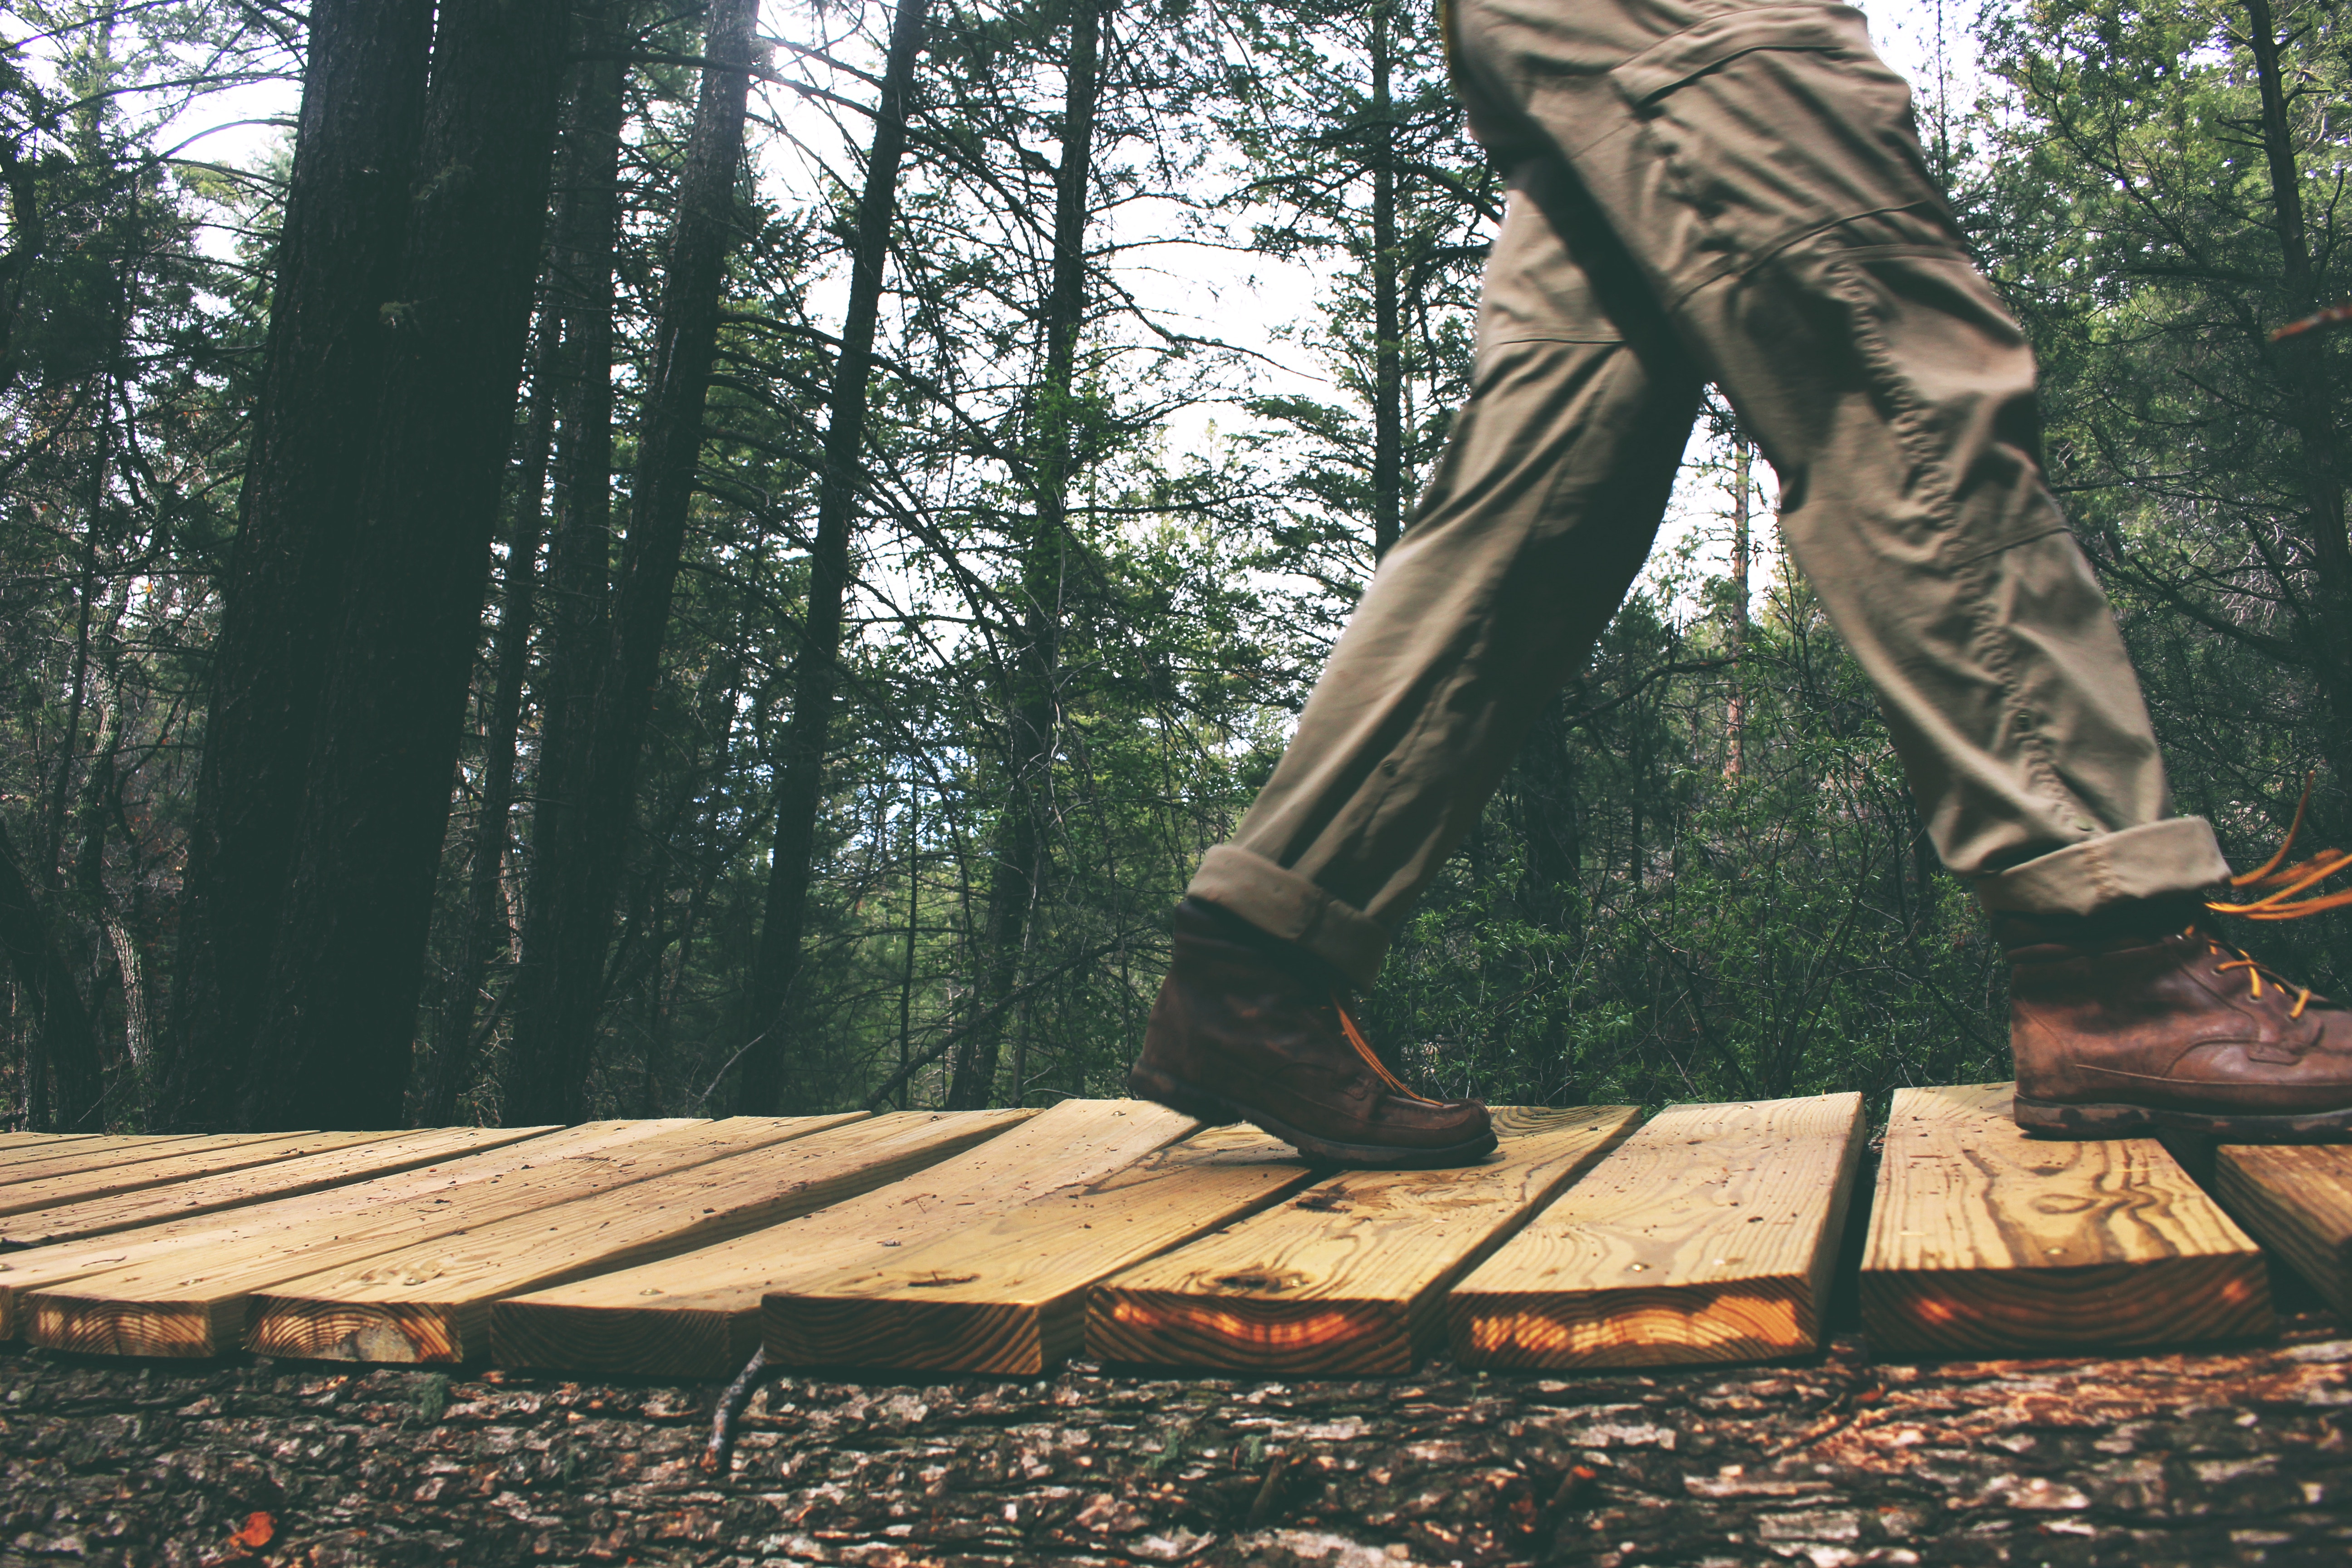 A walk in the woods can improve mental health. Photo by Lacey Raper on Unsplash﻿